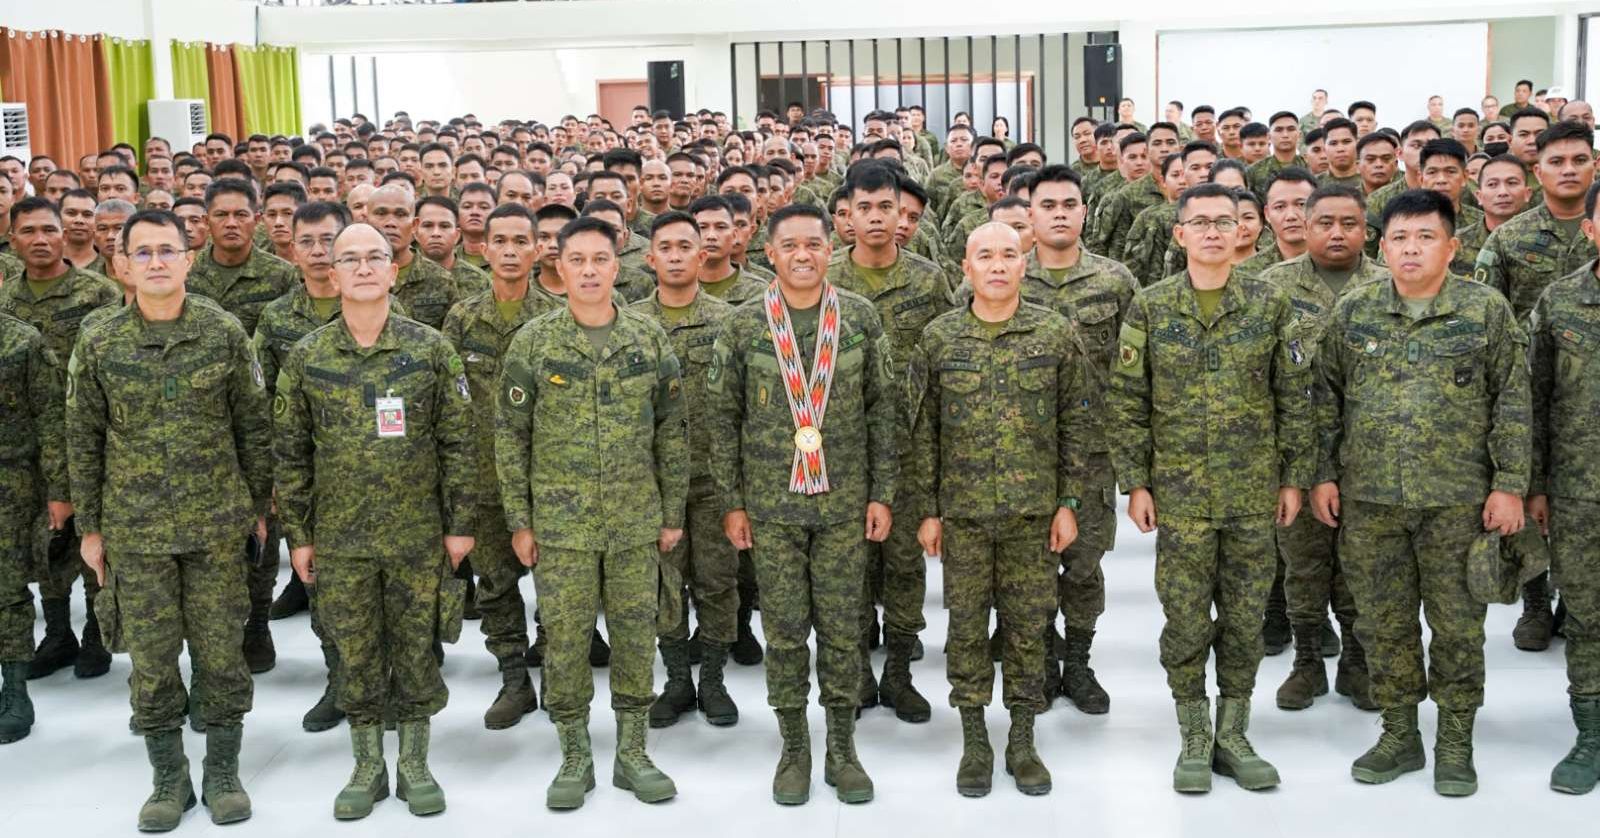 Soldiers told to stay united in CSAFP’s visit in Davao De Oro, Davao City